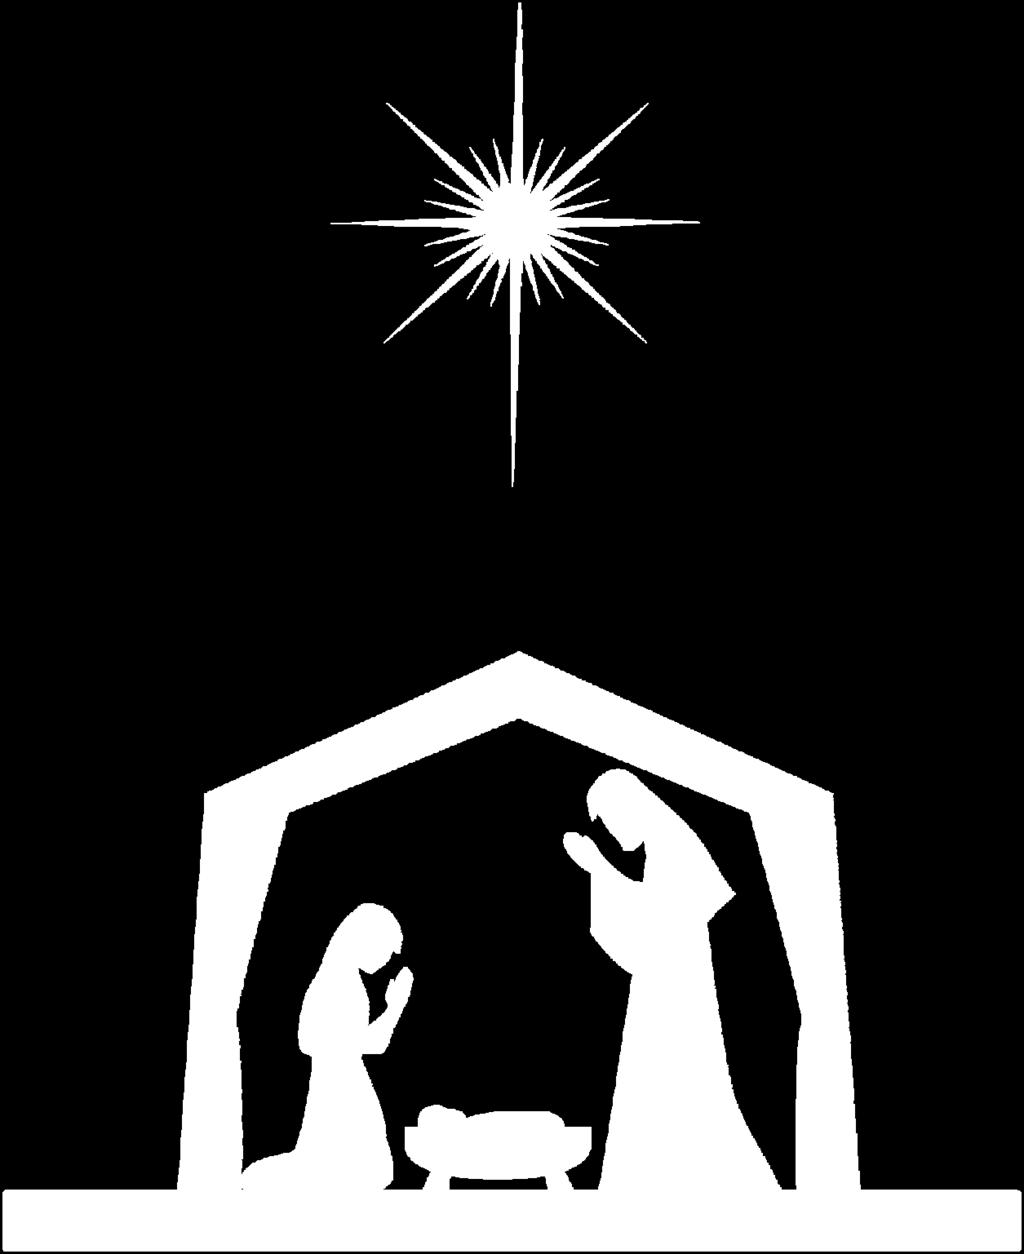 We rejoice in our Savior s birth - remembering the great gift of faith He has given us through the mystery of His incarnation and the saving power of His death and resurrection.